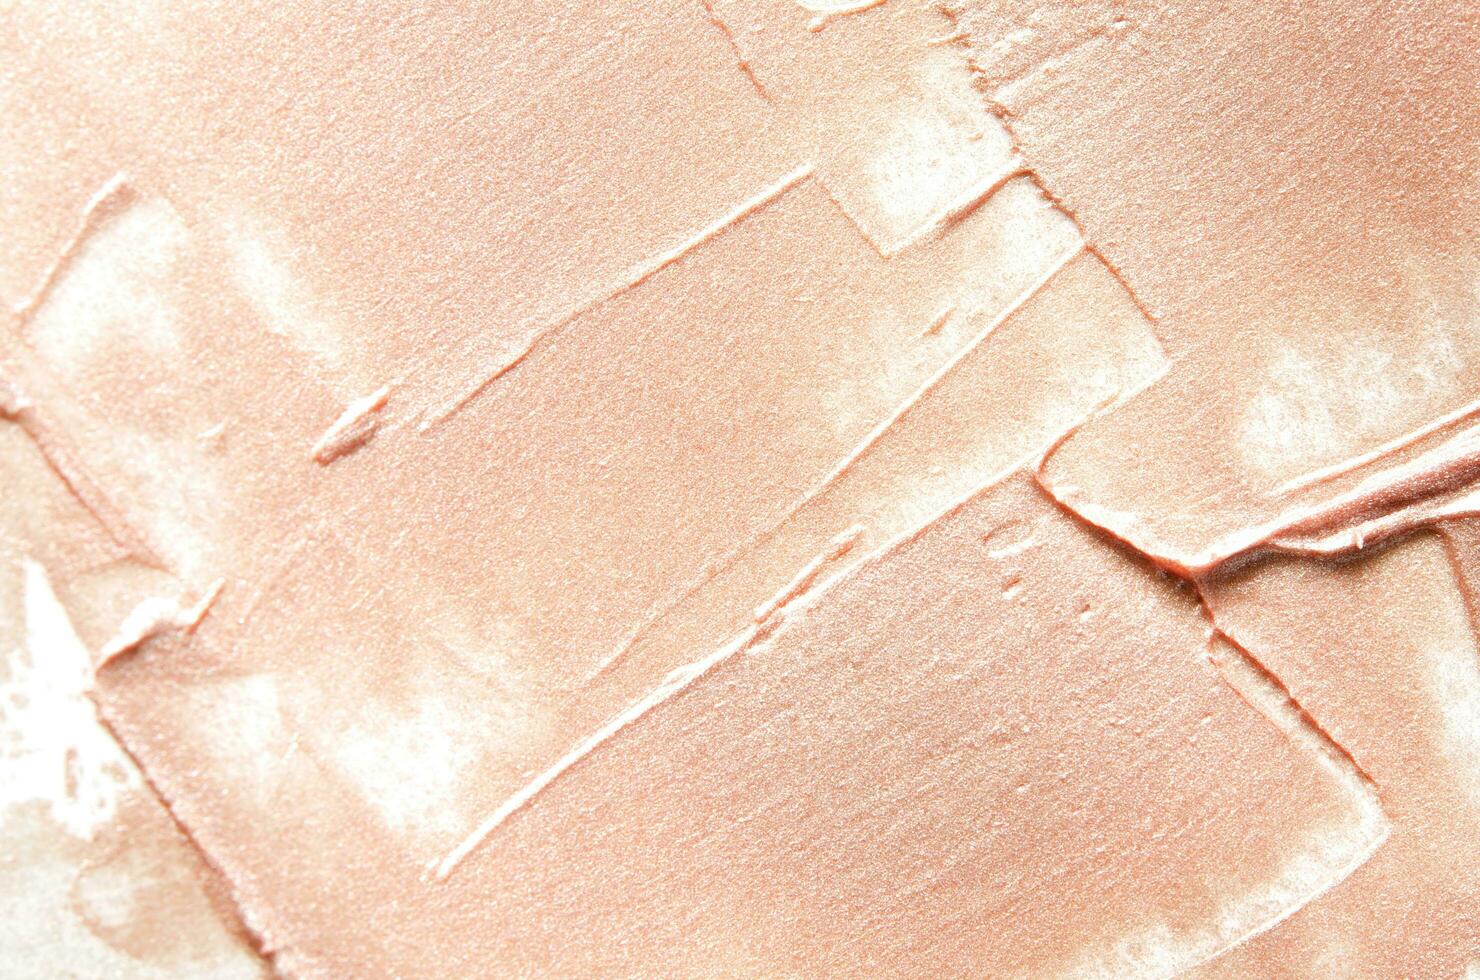 Beige smears of crushed highlighter or luminizer. - Image photo